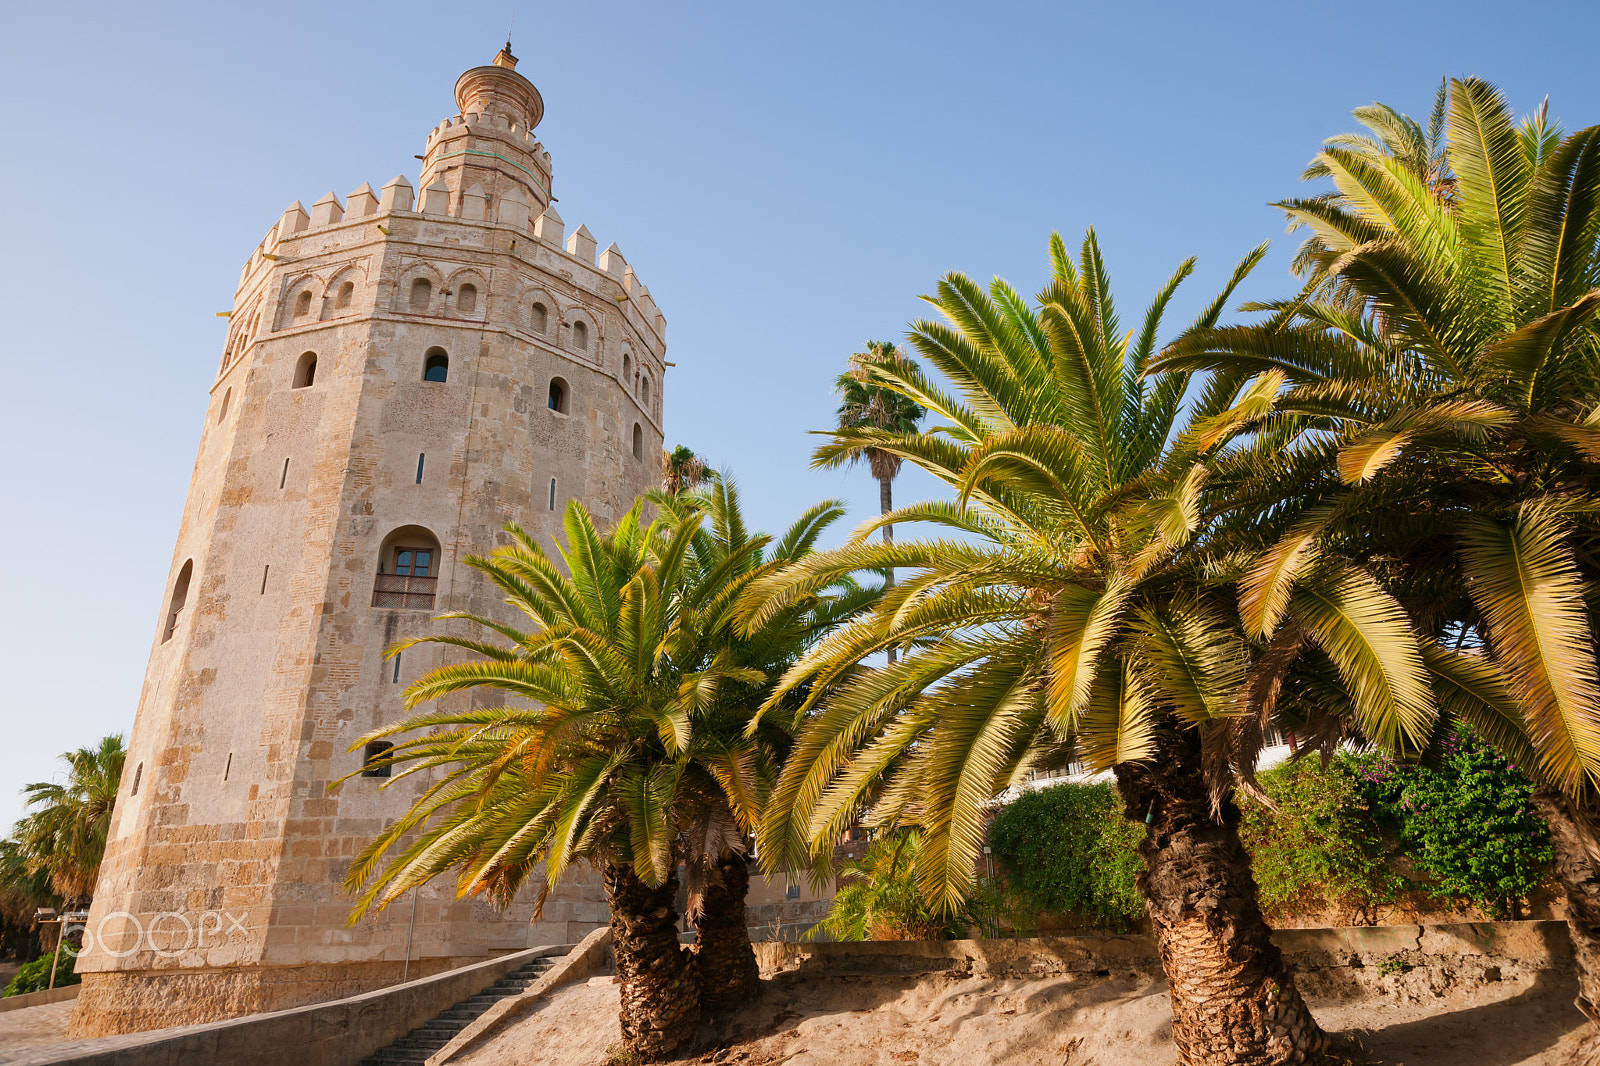 Sony Alpha DSLR-A900 sample photo. The torre del oro in seville, southern spain. photography